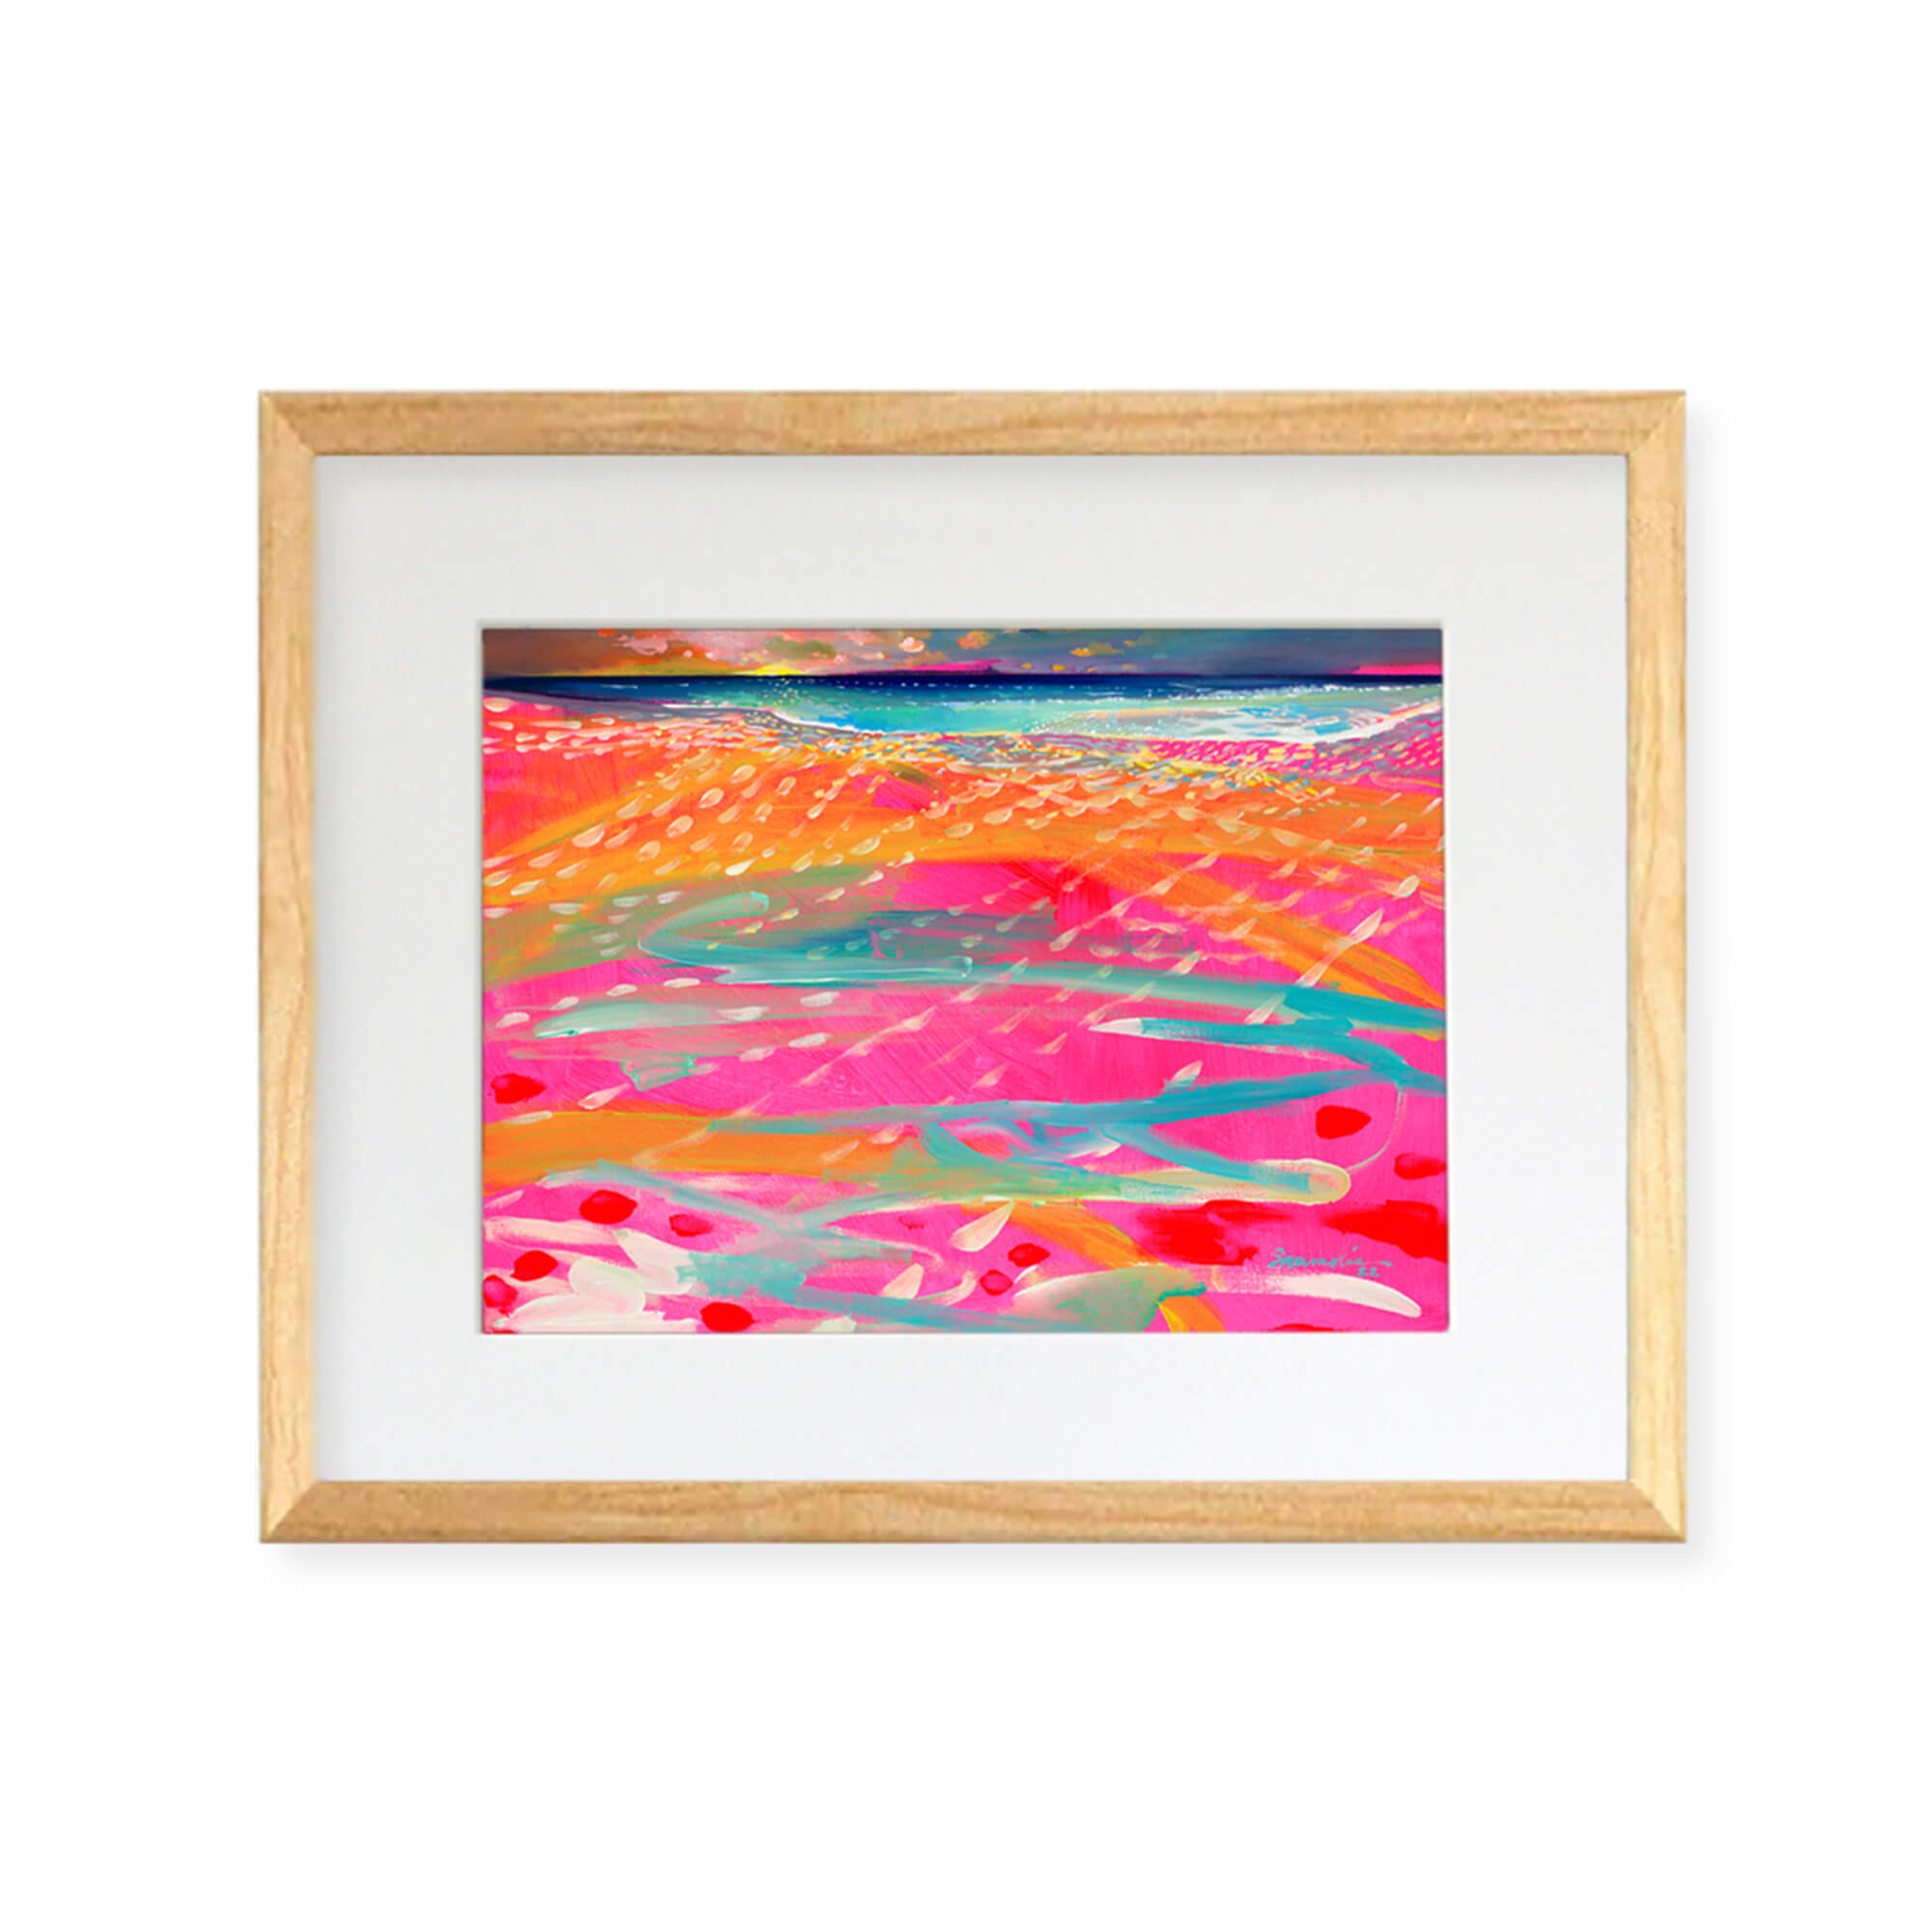 A framed matted art print featuring this beautiful vibrant neon-colored seascape by popular Hawaii artist Saumolia Puapuaga